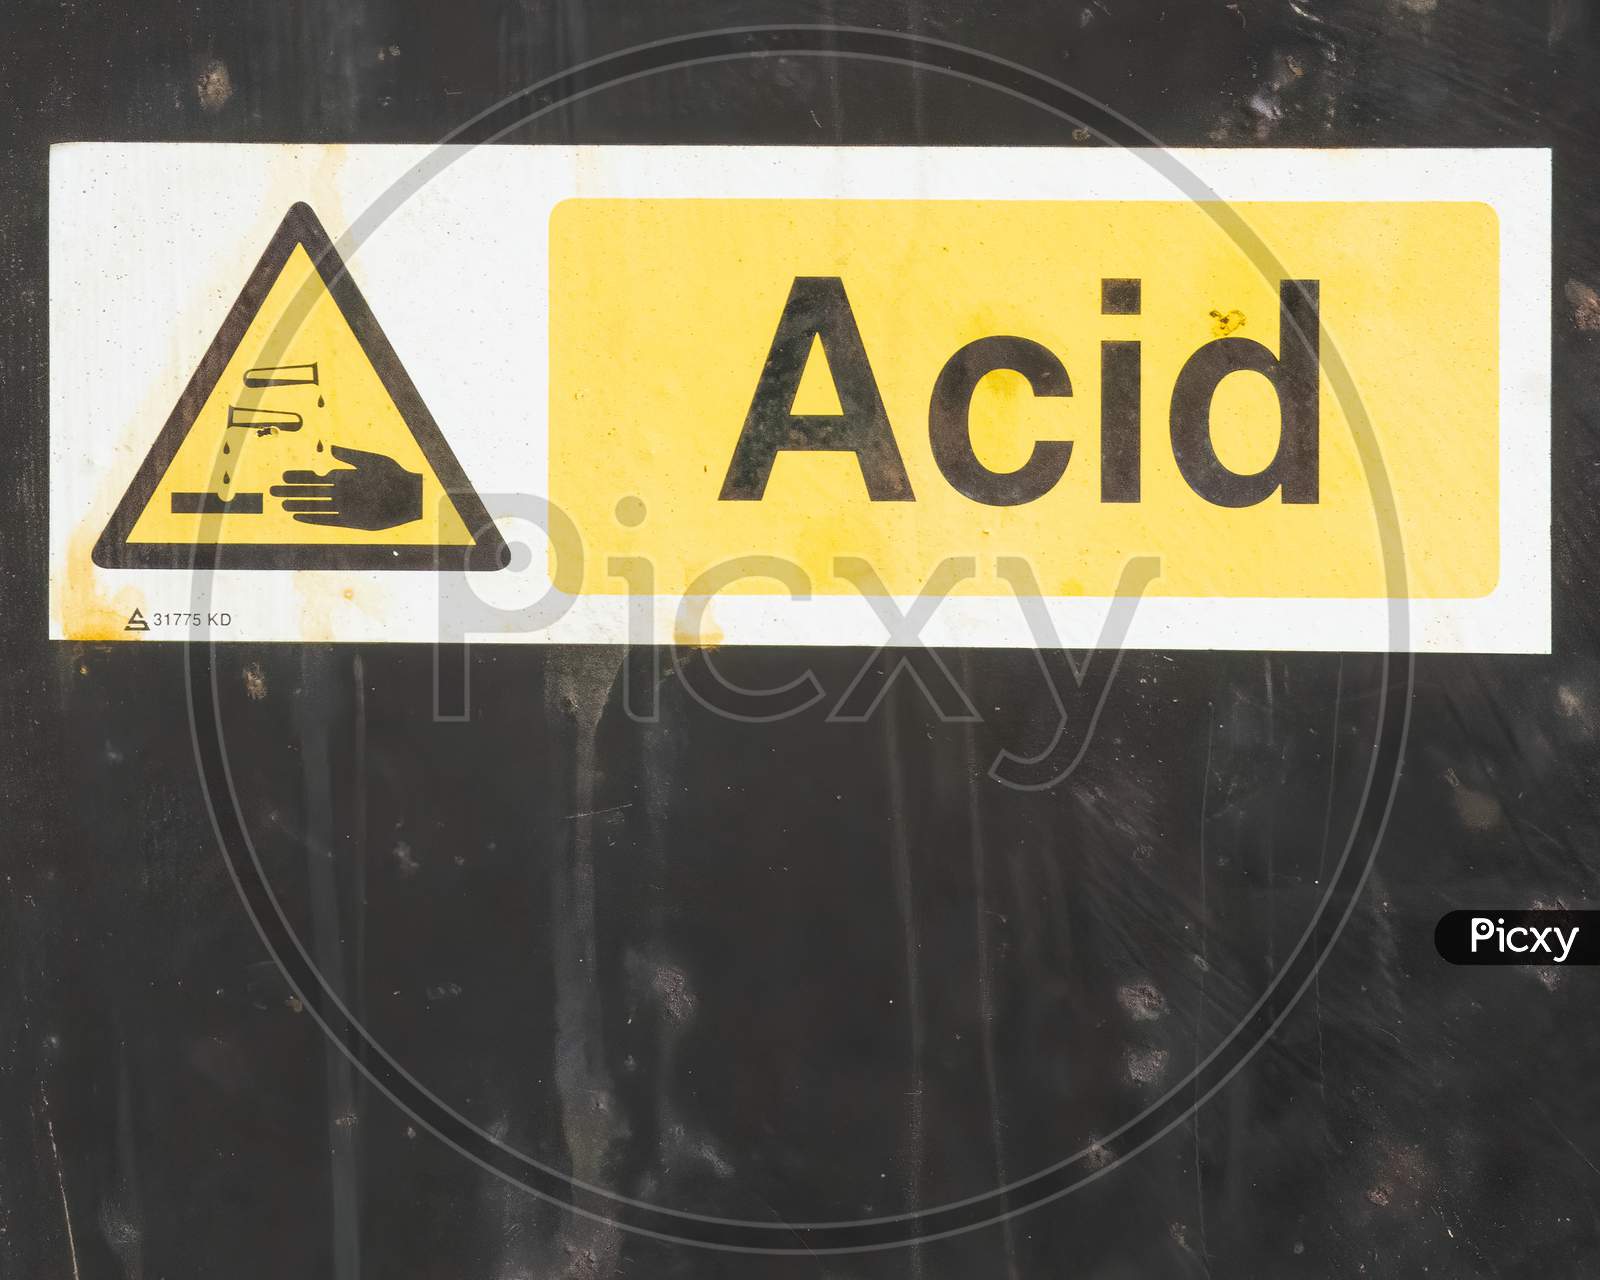 Dirty Acid Burns Warning Sign On Wall With Copy Space Underneath. Burns Hand Symbol On Yellow Triangle With Word Acid.  Beware Of Risky Environment And Danger.  Diss, Norfolk, Uk - June 19th 2020